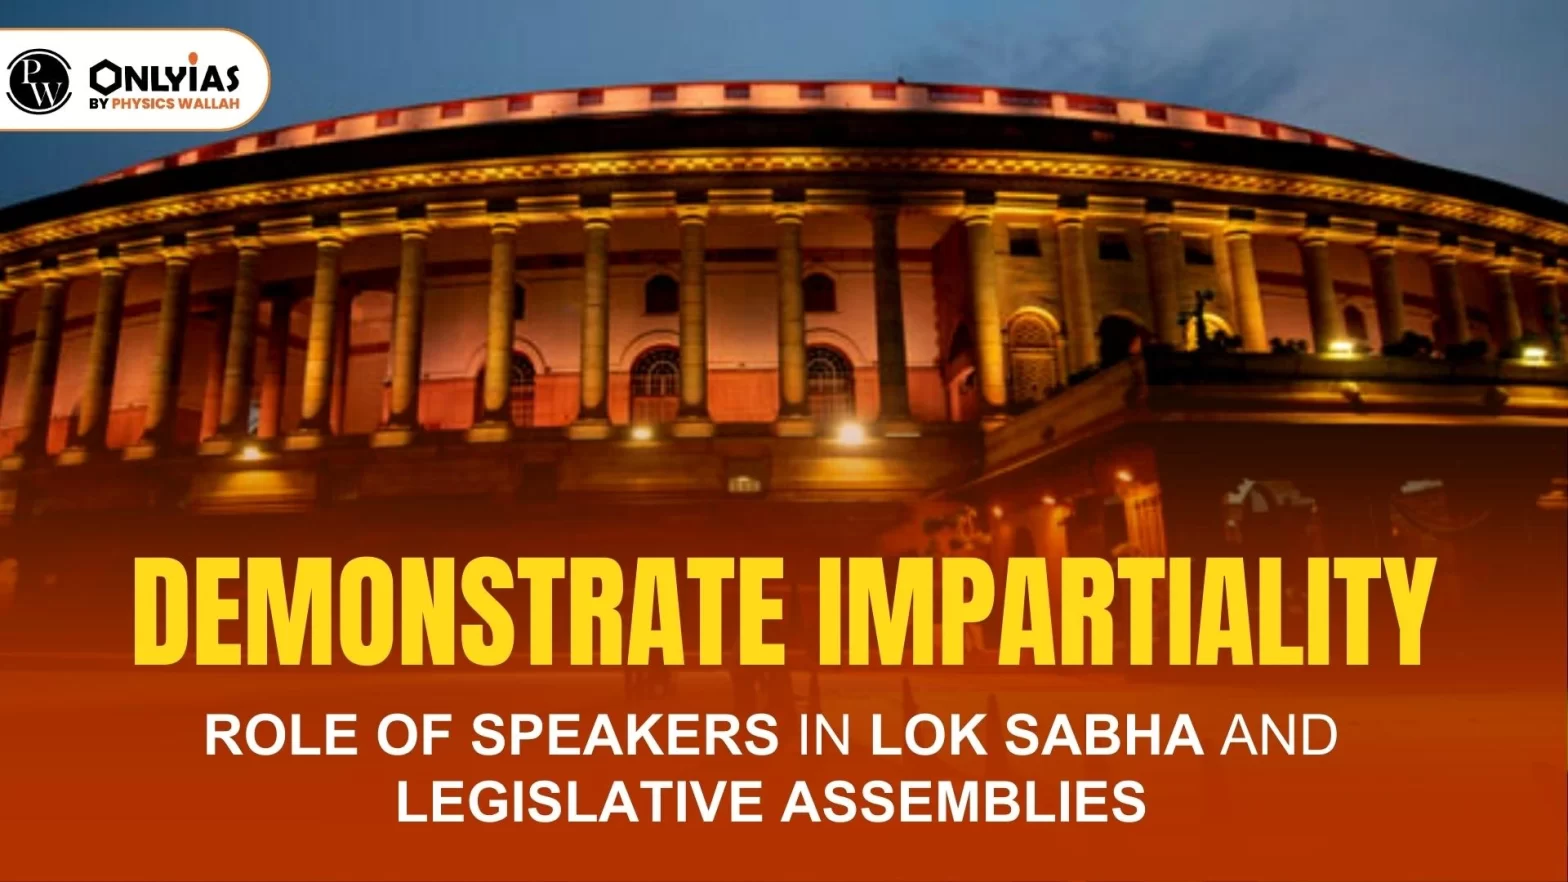 Demonstrate Impartiality: Role of Speakers in Lok Sabha and Legislative Assemblies